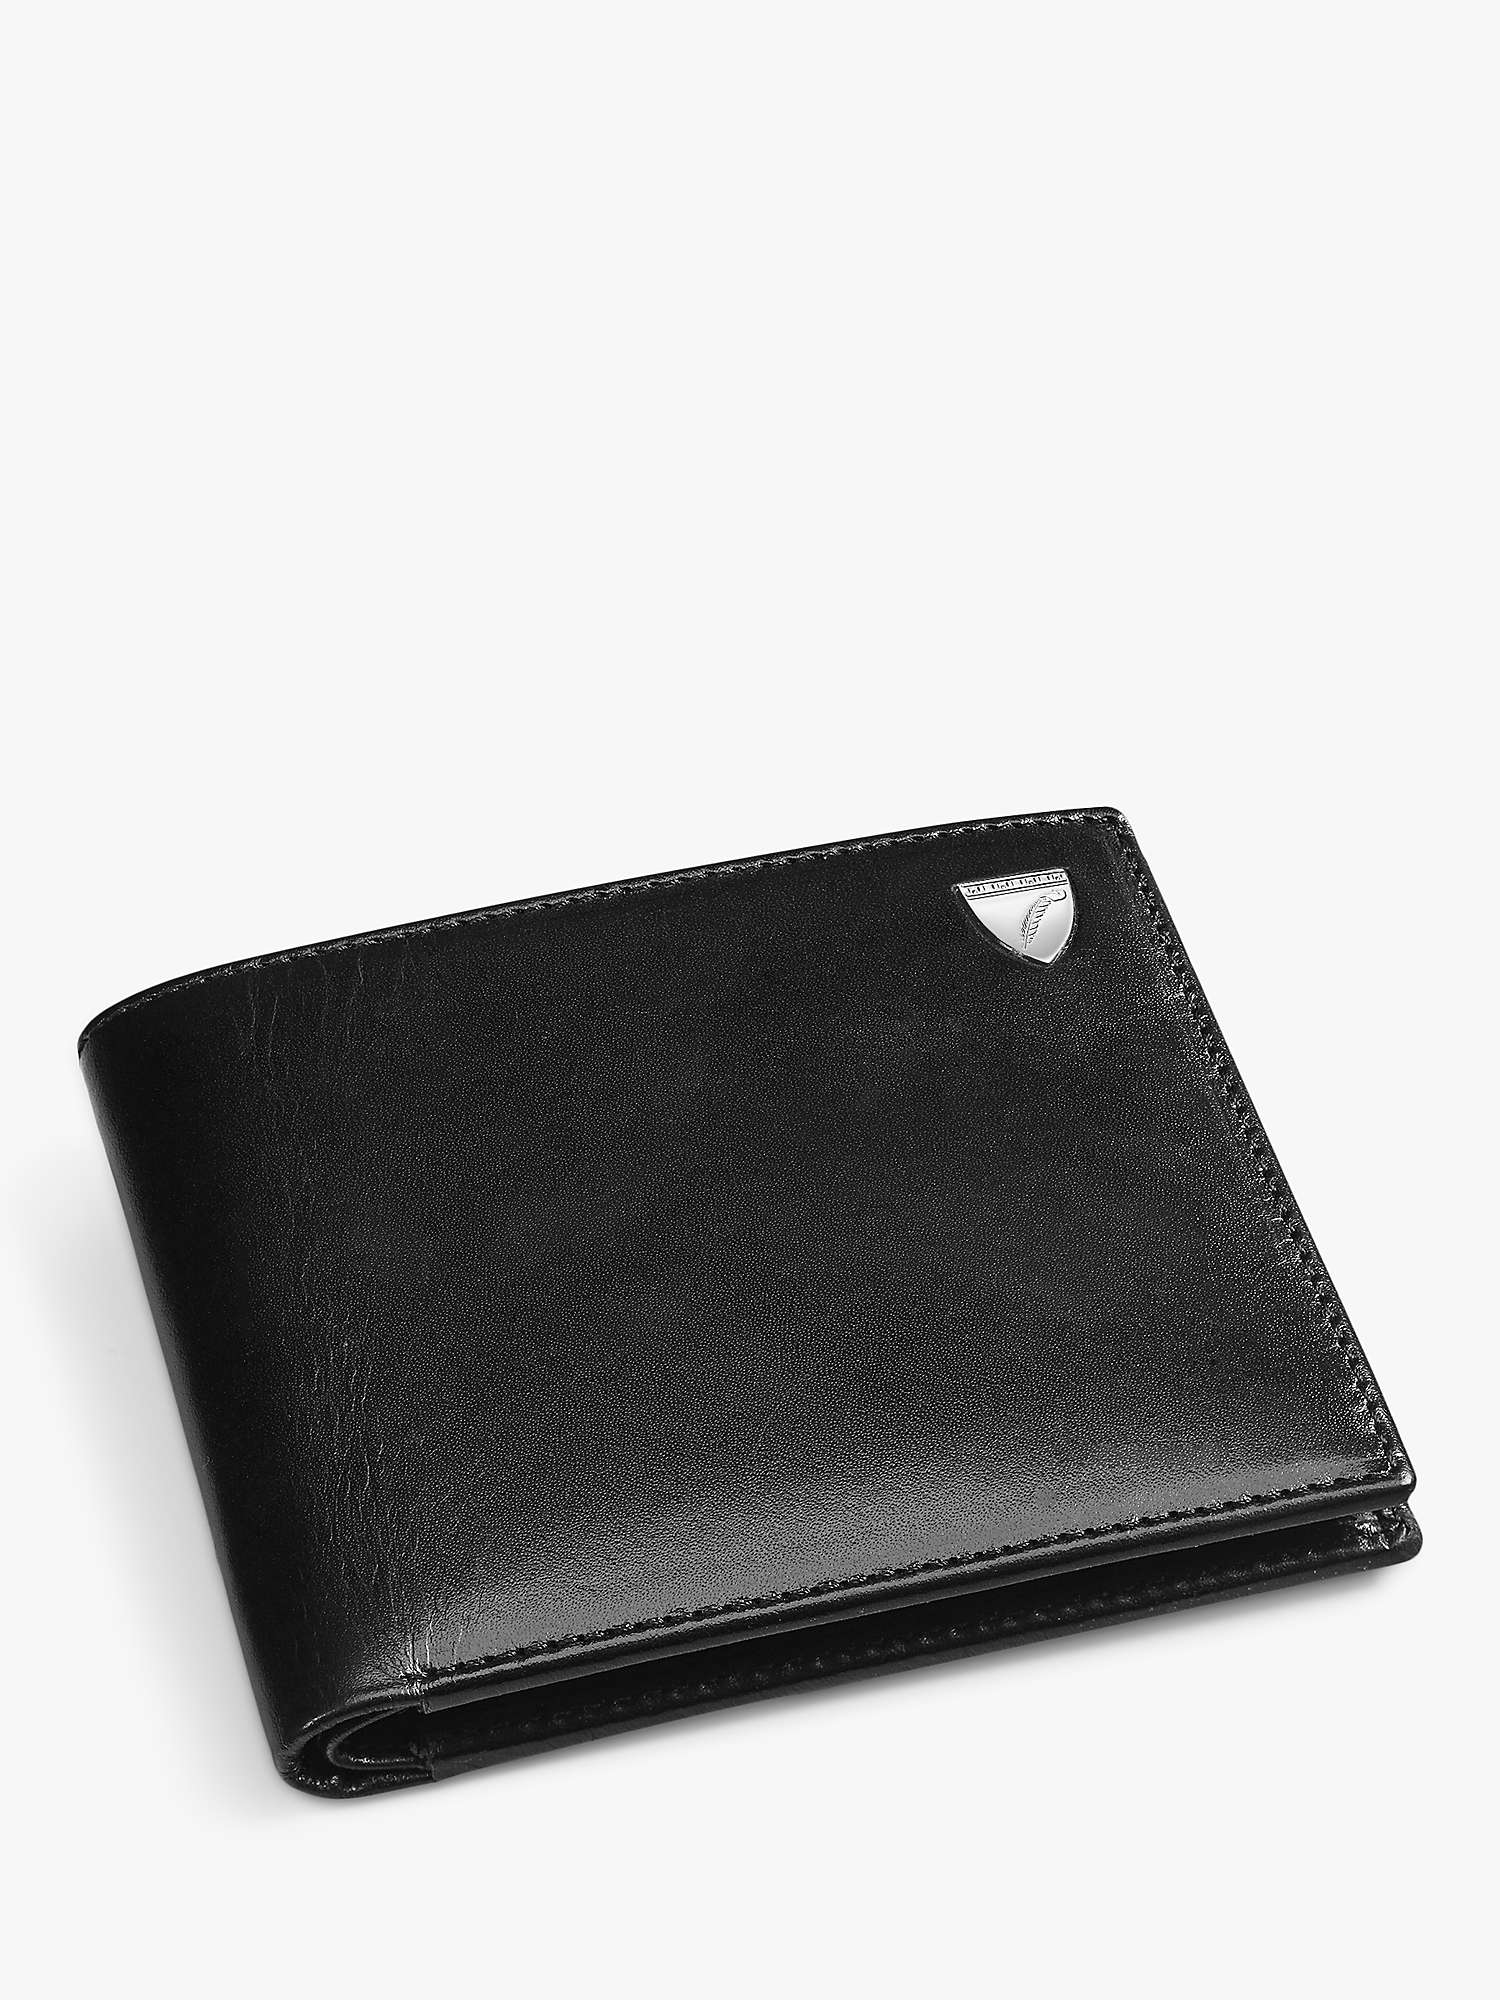 Buy Aspinal of London Single Billfold Smooth Leather Coin Wallet Online at johnlewis.com